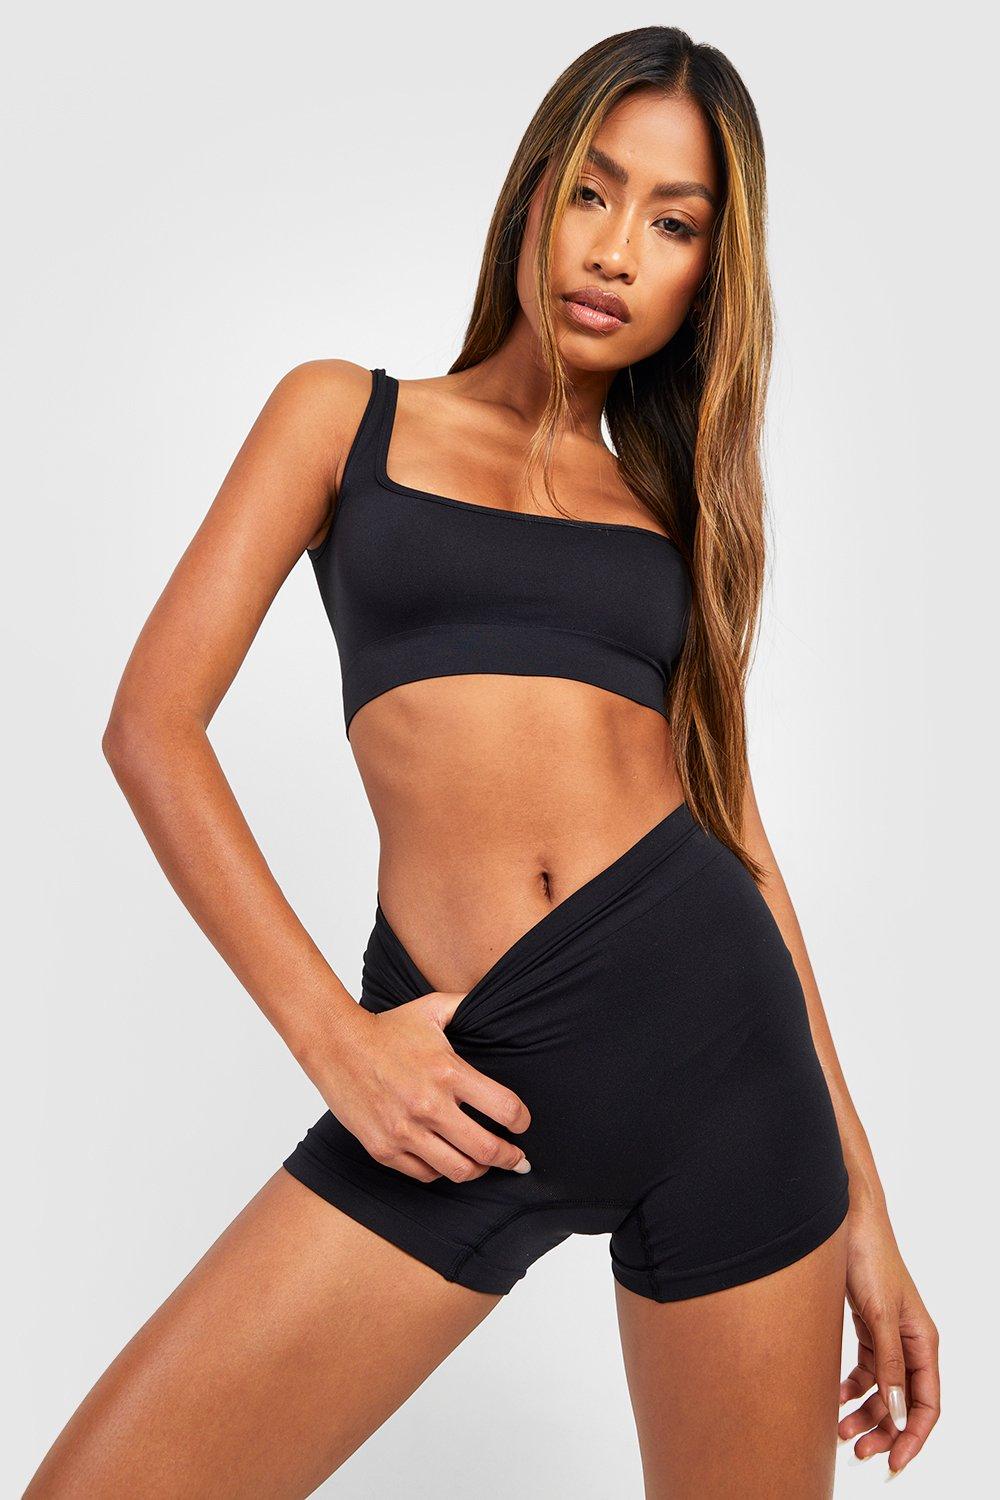 Shop Boohoo Black Bralettes up to 85% Off